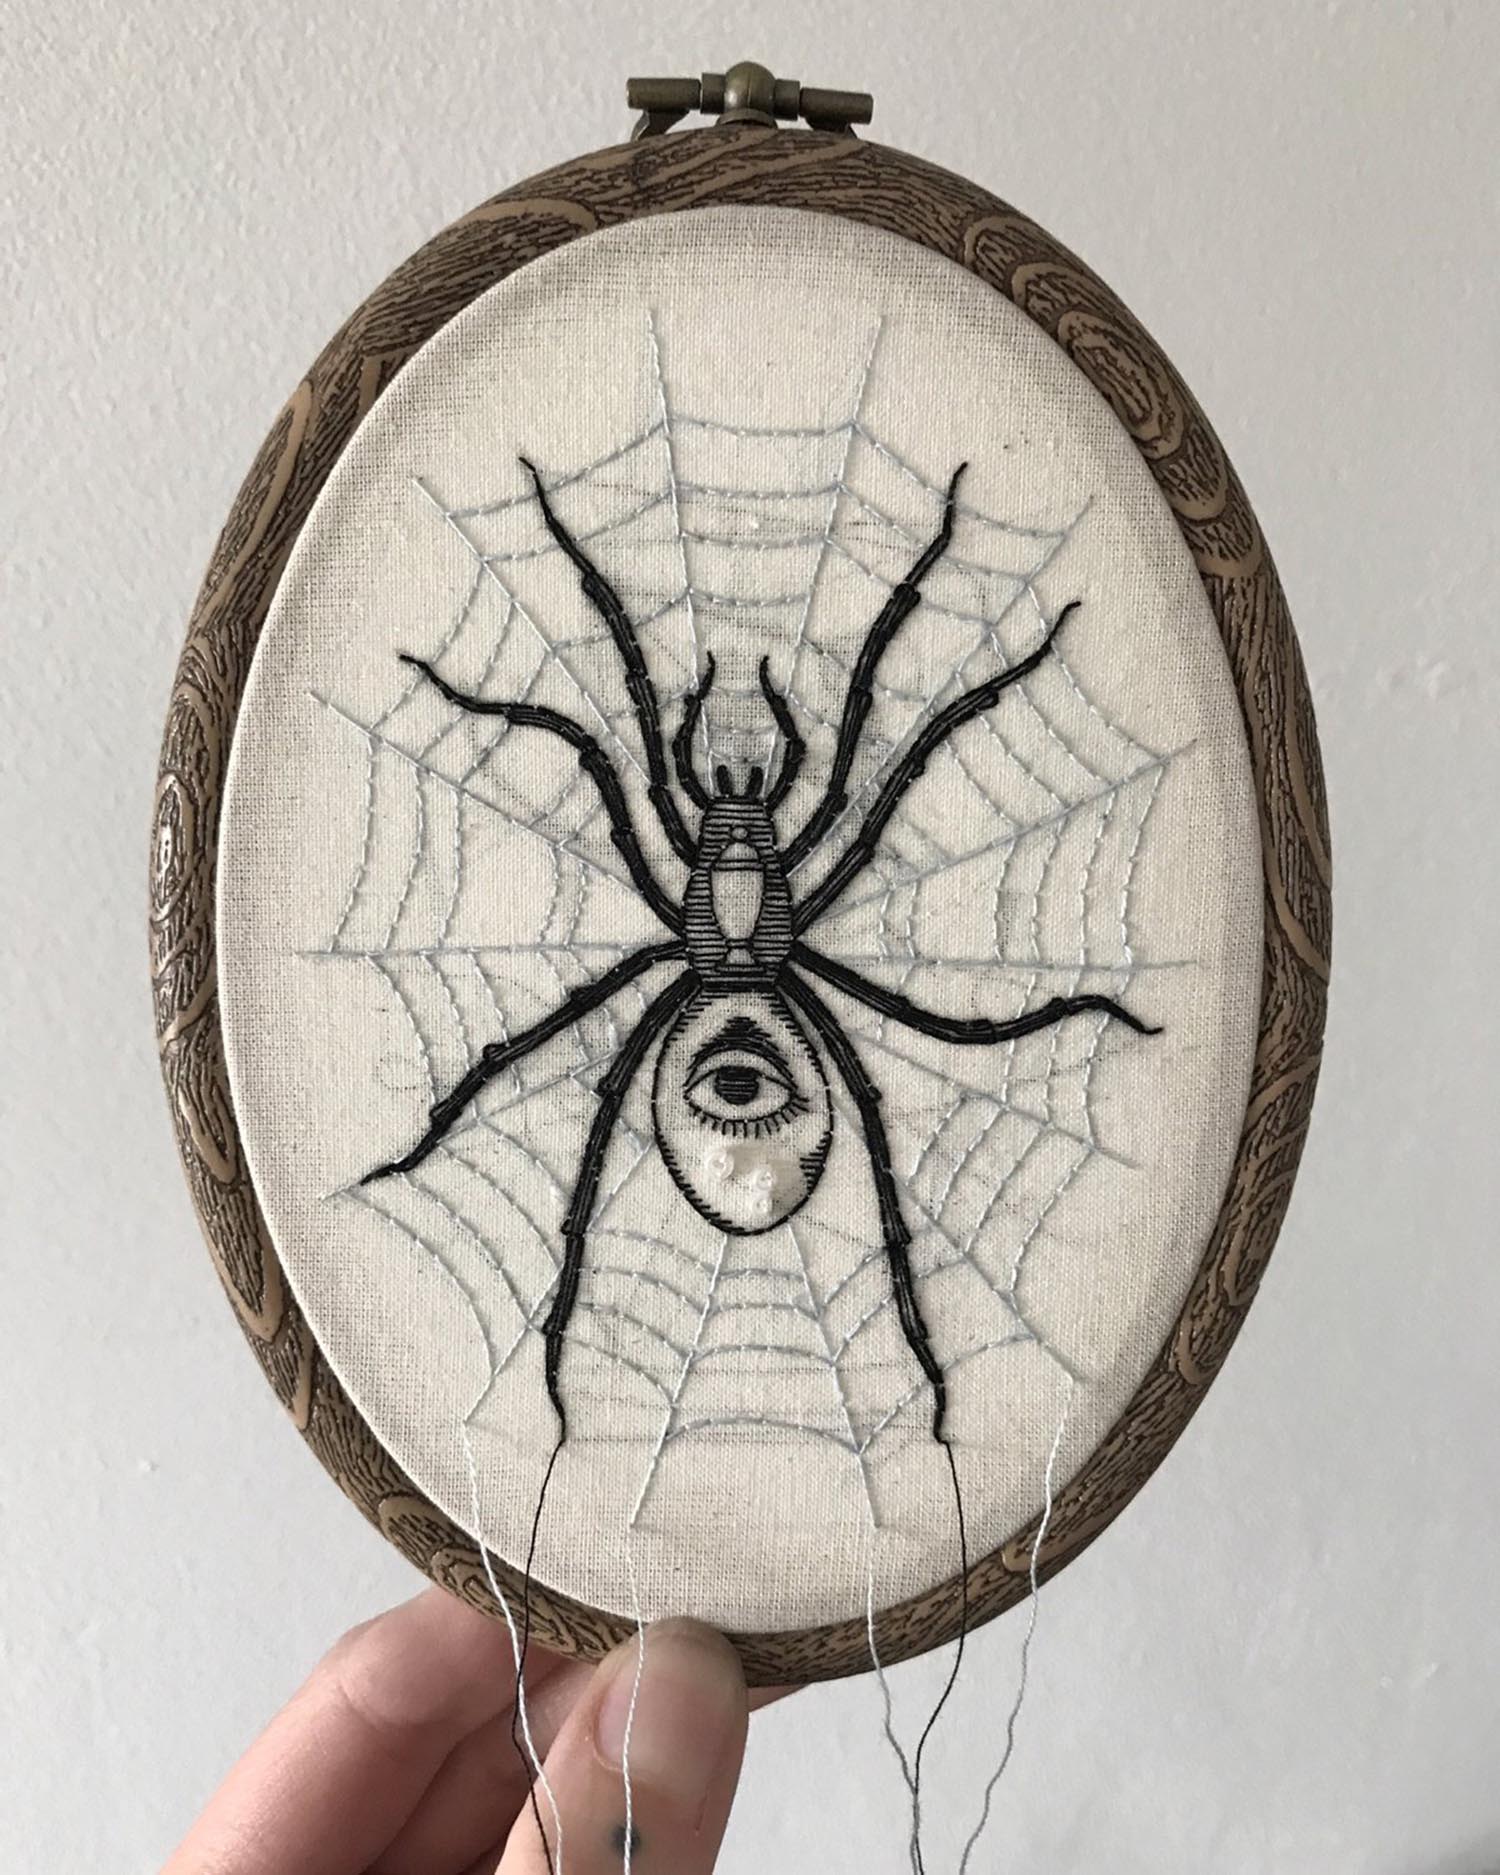 Embroidery of a spider